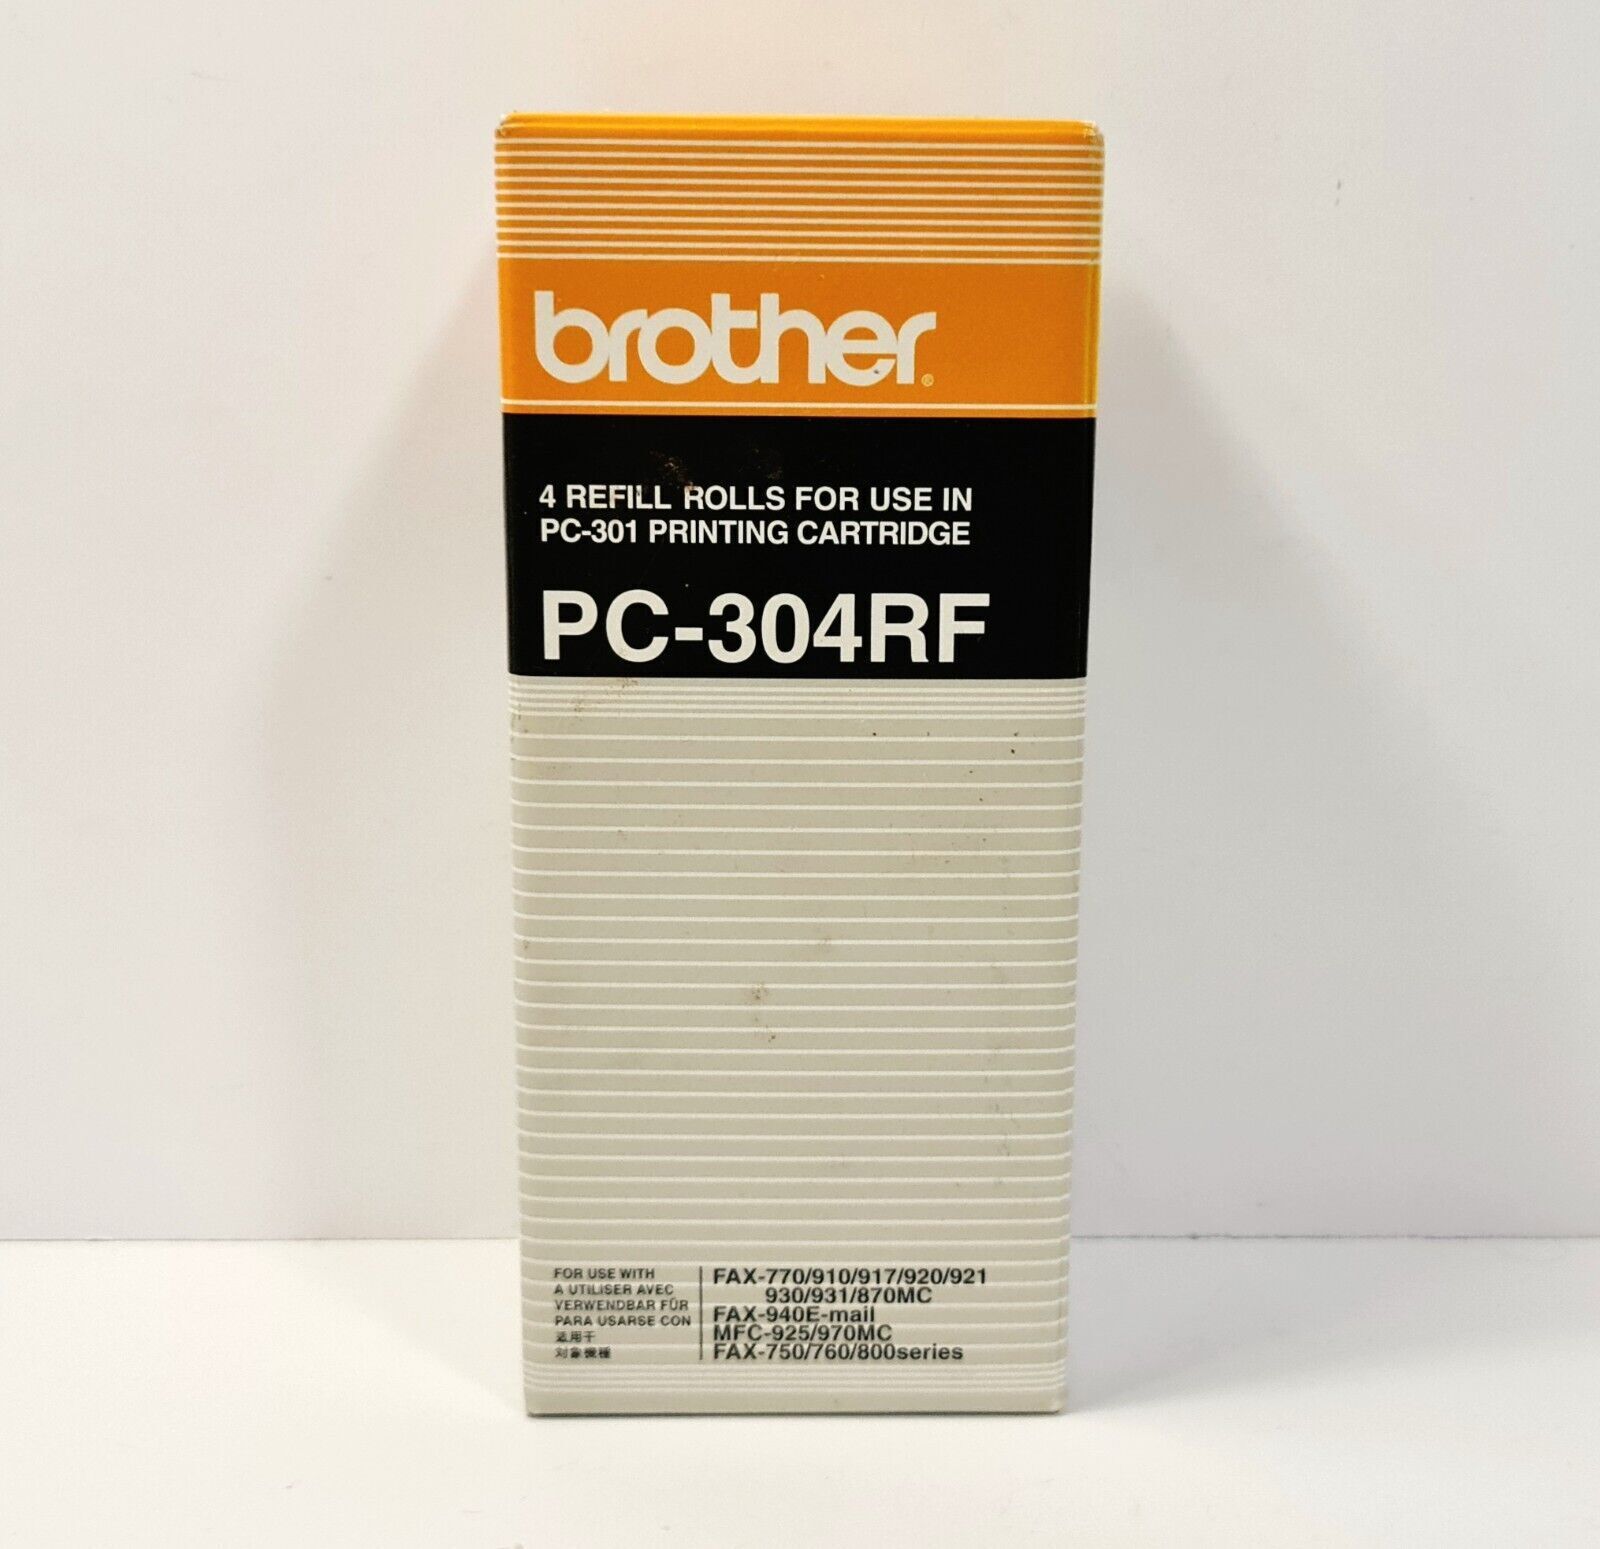 New Old Stock Brother PC-304RF 4 Refill Rolls for  PC-301 Printing Cartridge Fax